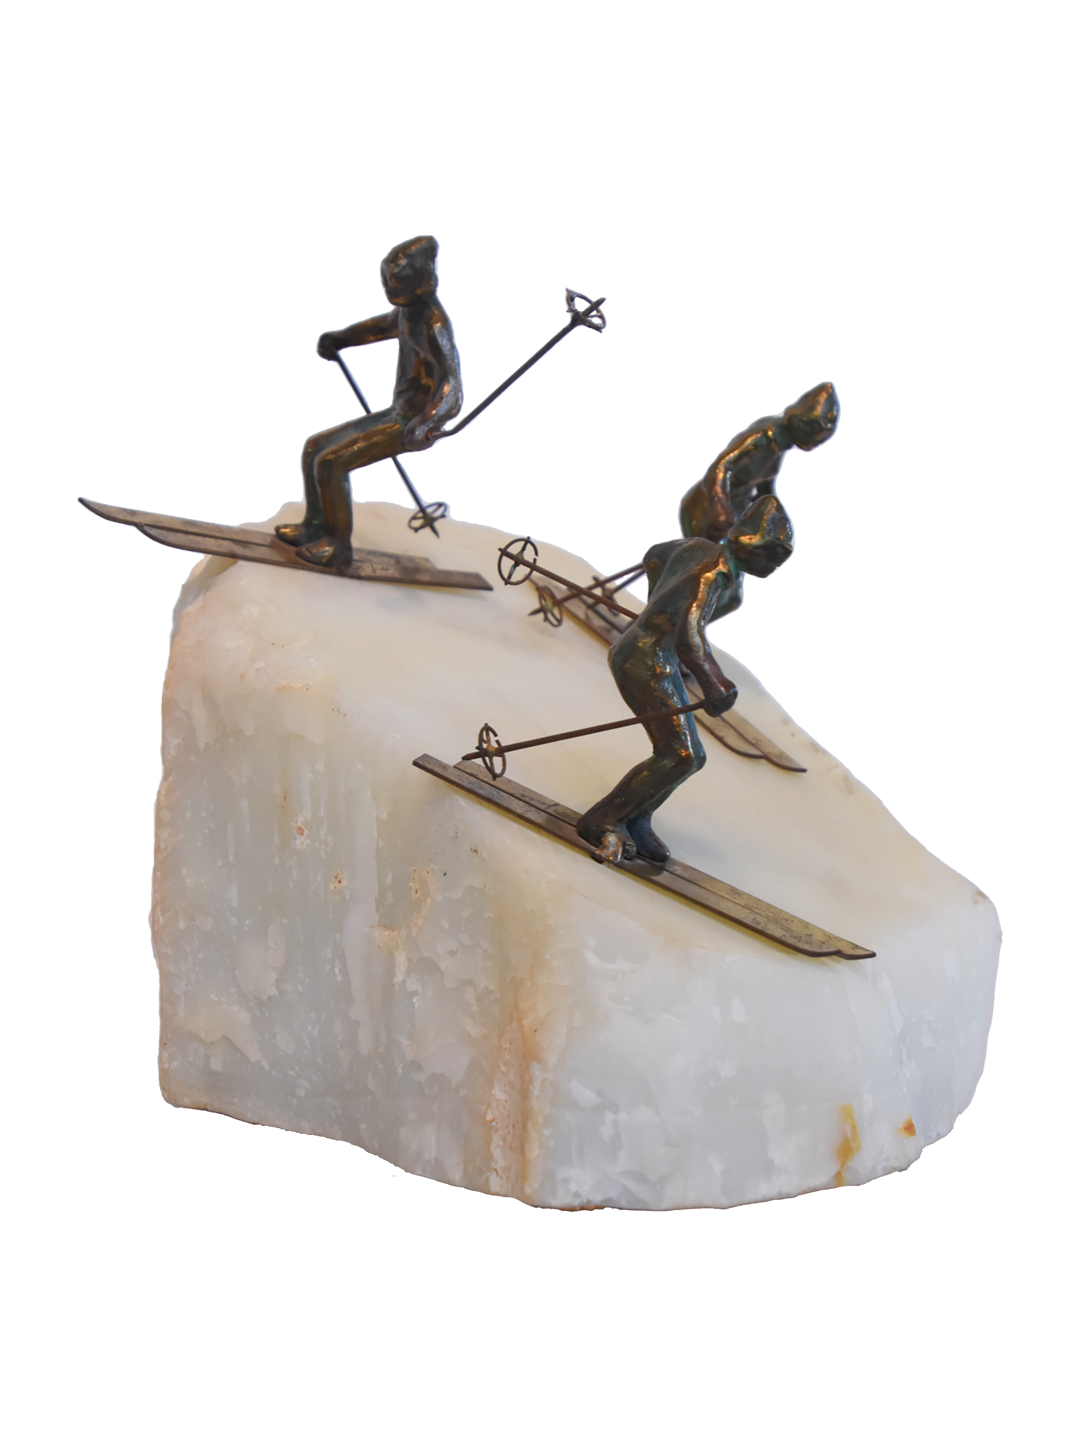 Sculpture of Skiers on Onyx by Curtis Jere